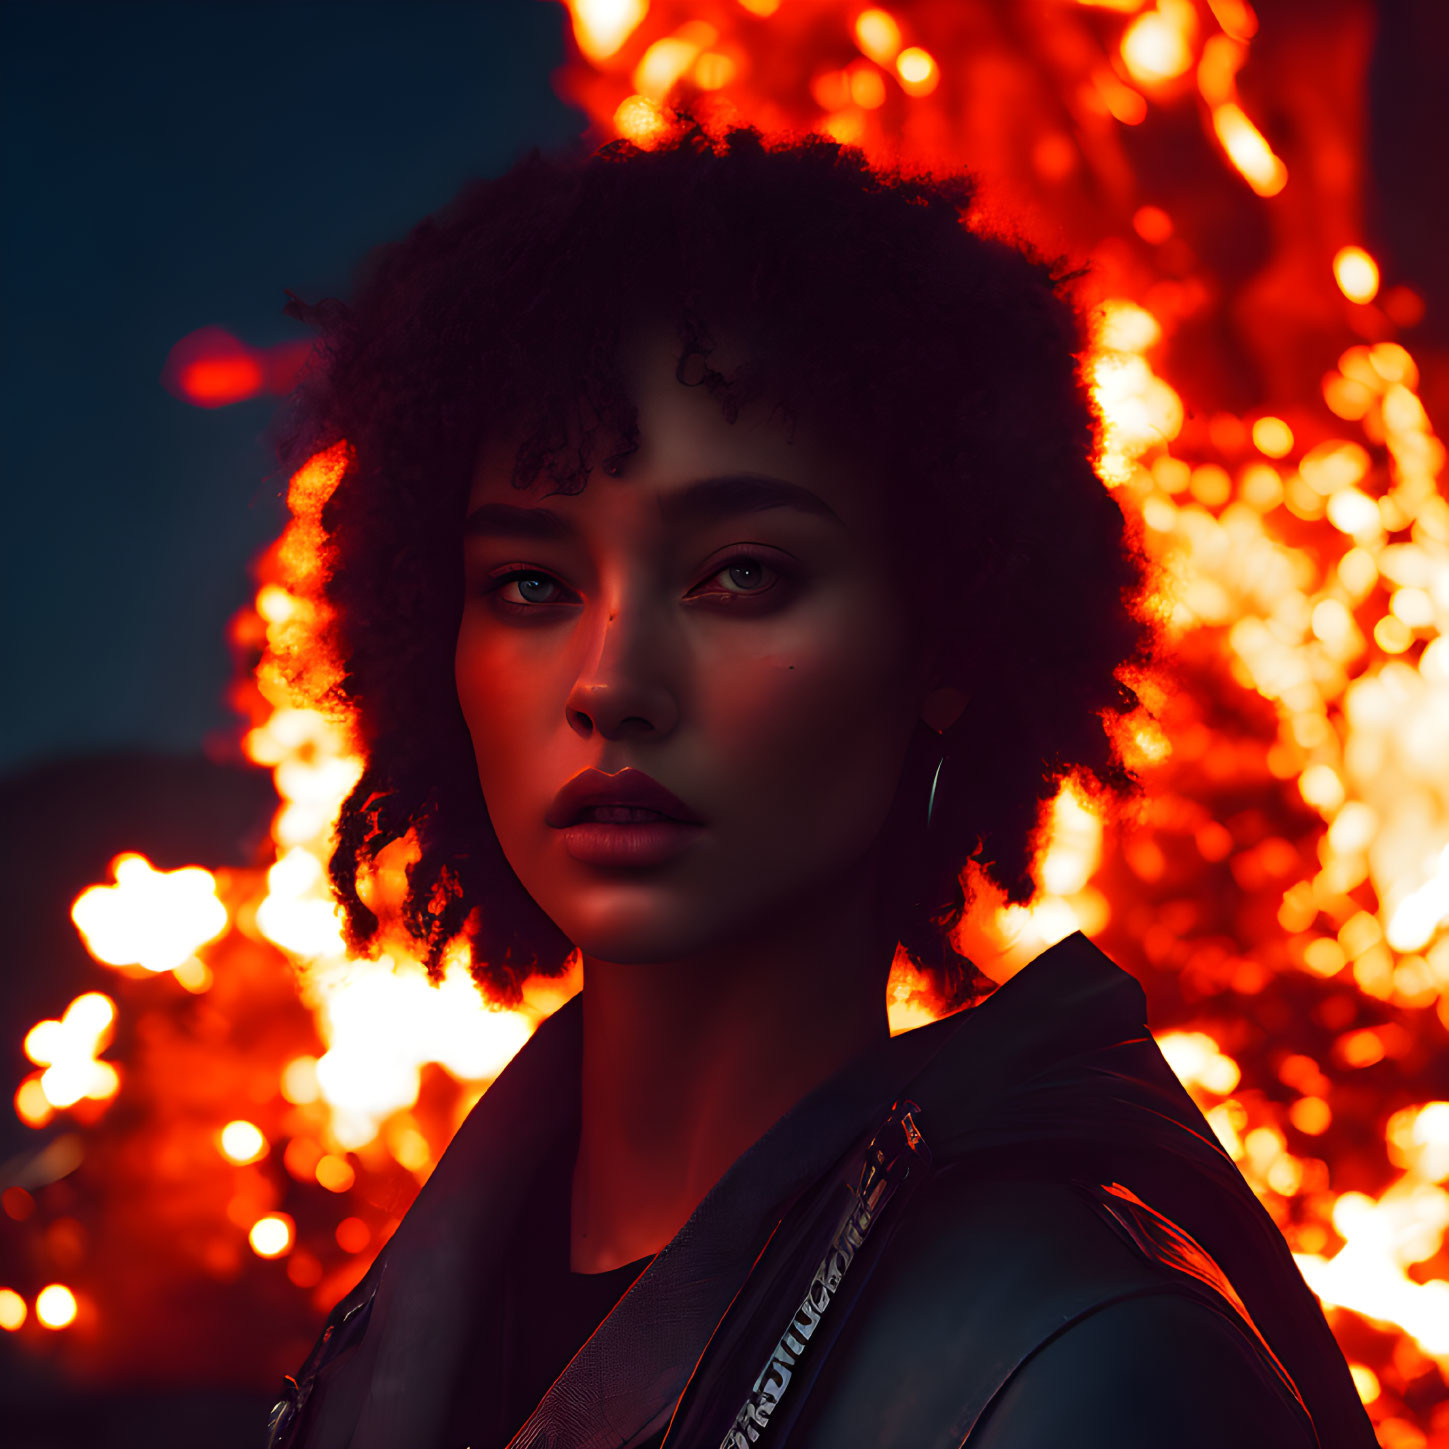 Curly-Haired Woman in Fiery Background with Eerie Red Glow